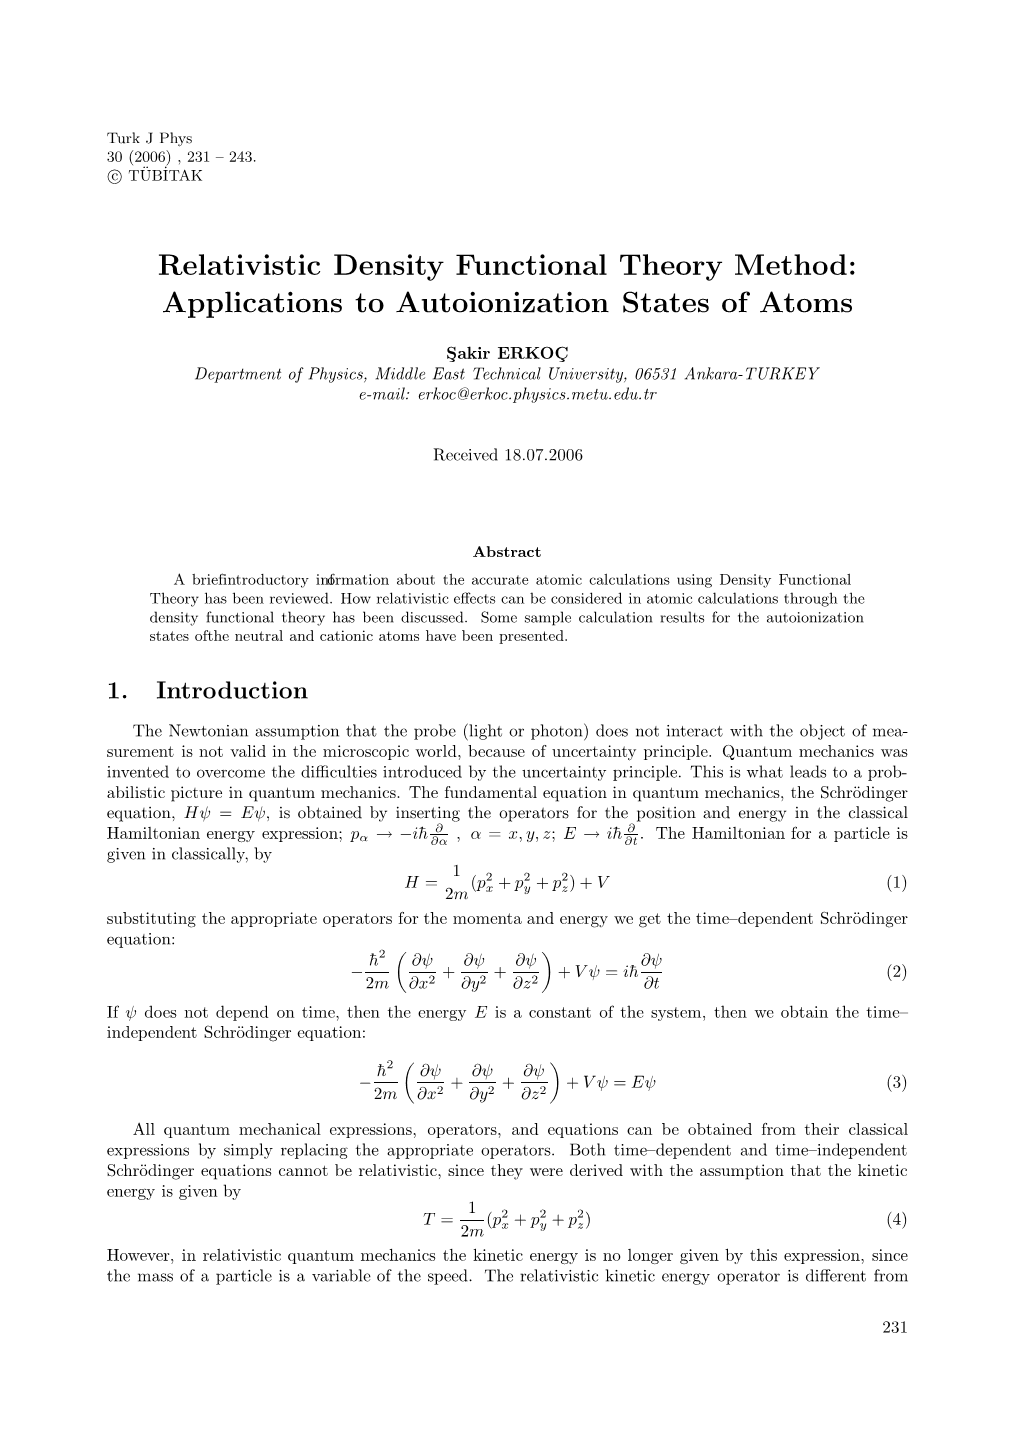 Relativistic Density Functional Theory Method: Applications to Autoionization States of Atoms